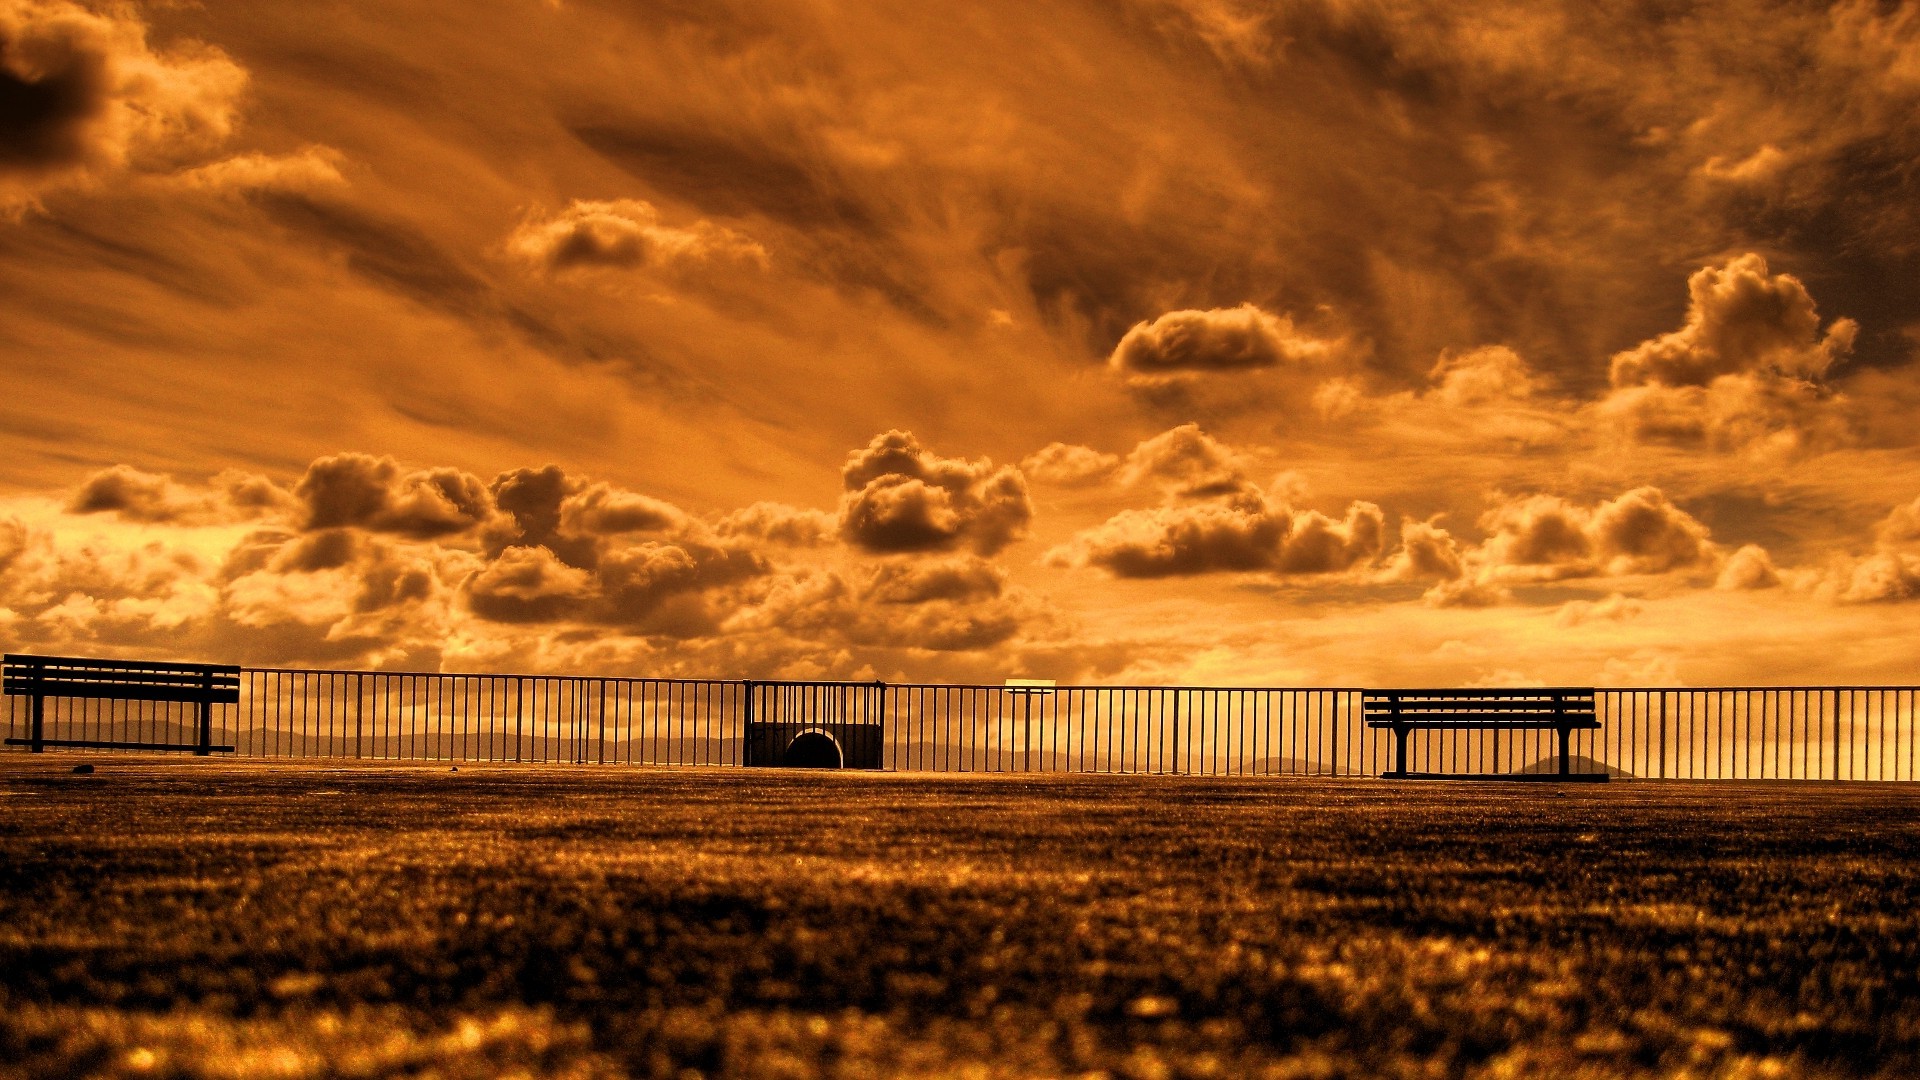 clouds, Bench, Sepia, Orange, Sky, Fence, Worms eye view Wallpaper